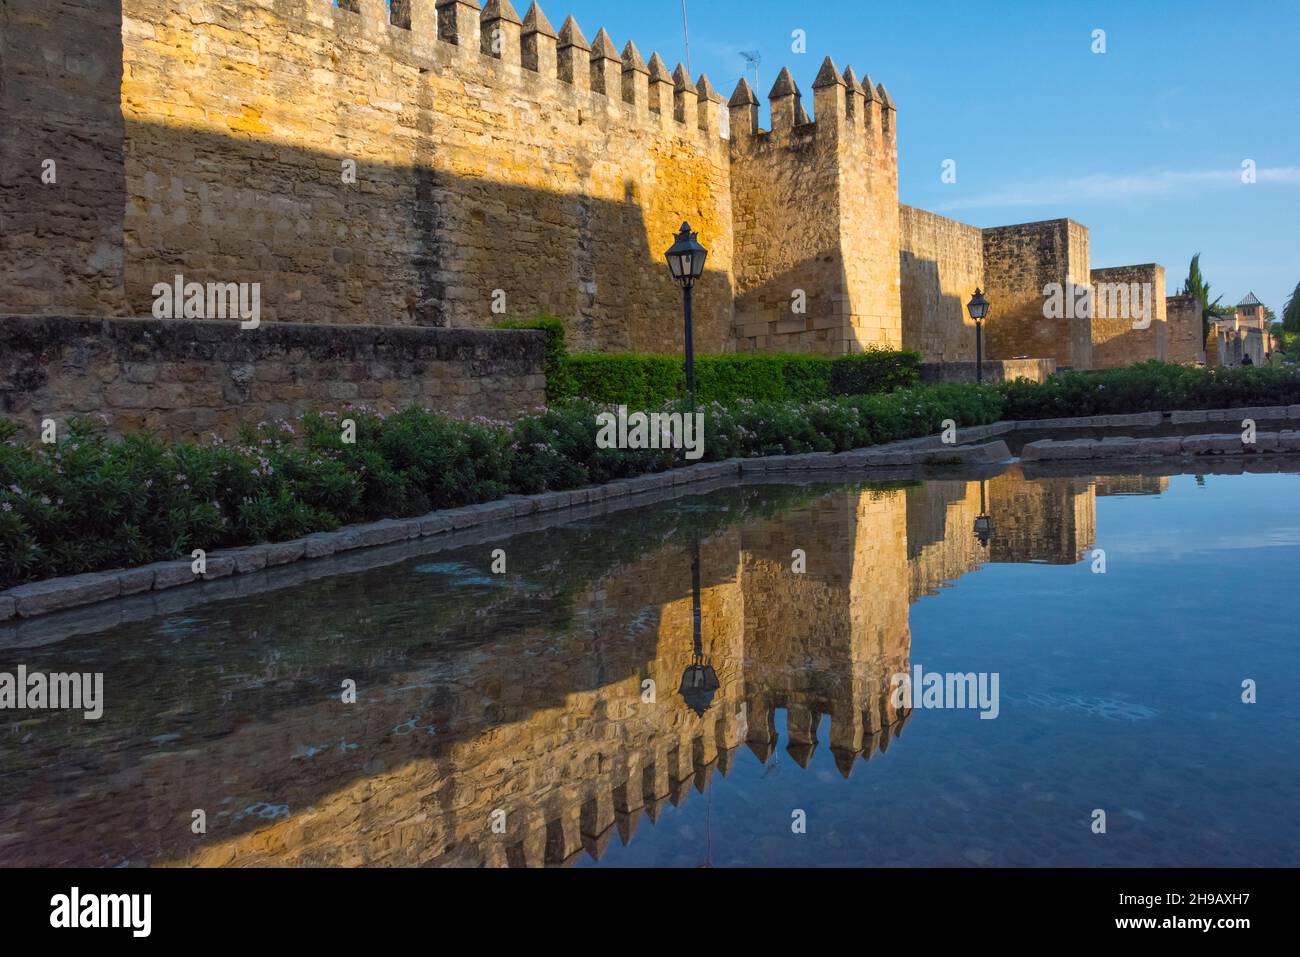 Roman walls of Cordoba with reflection in the moat, Cordoba, Andalusia Autonomous Community, Spain Stock Photo